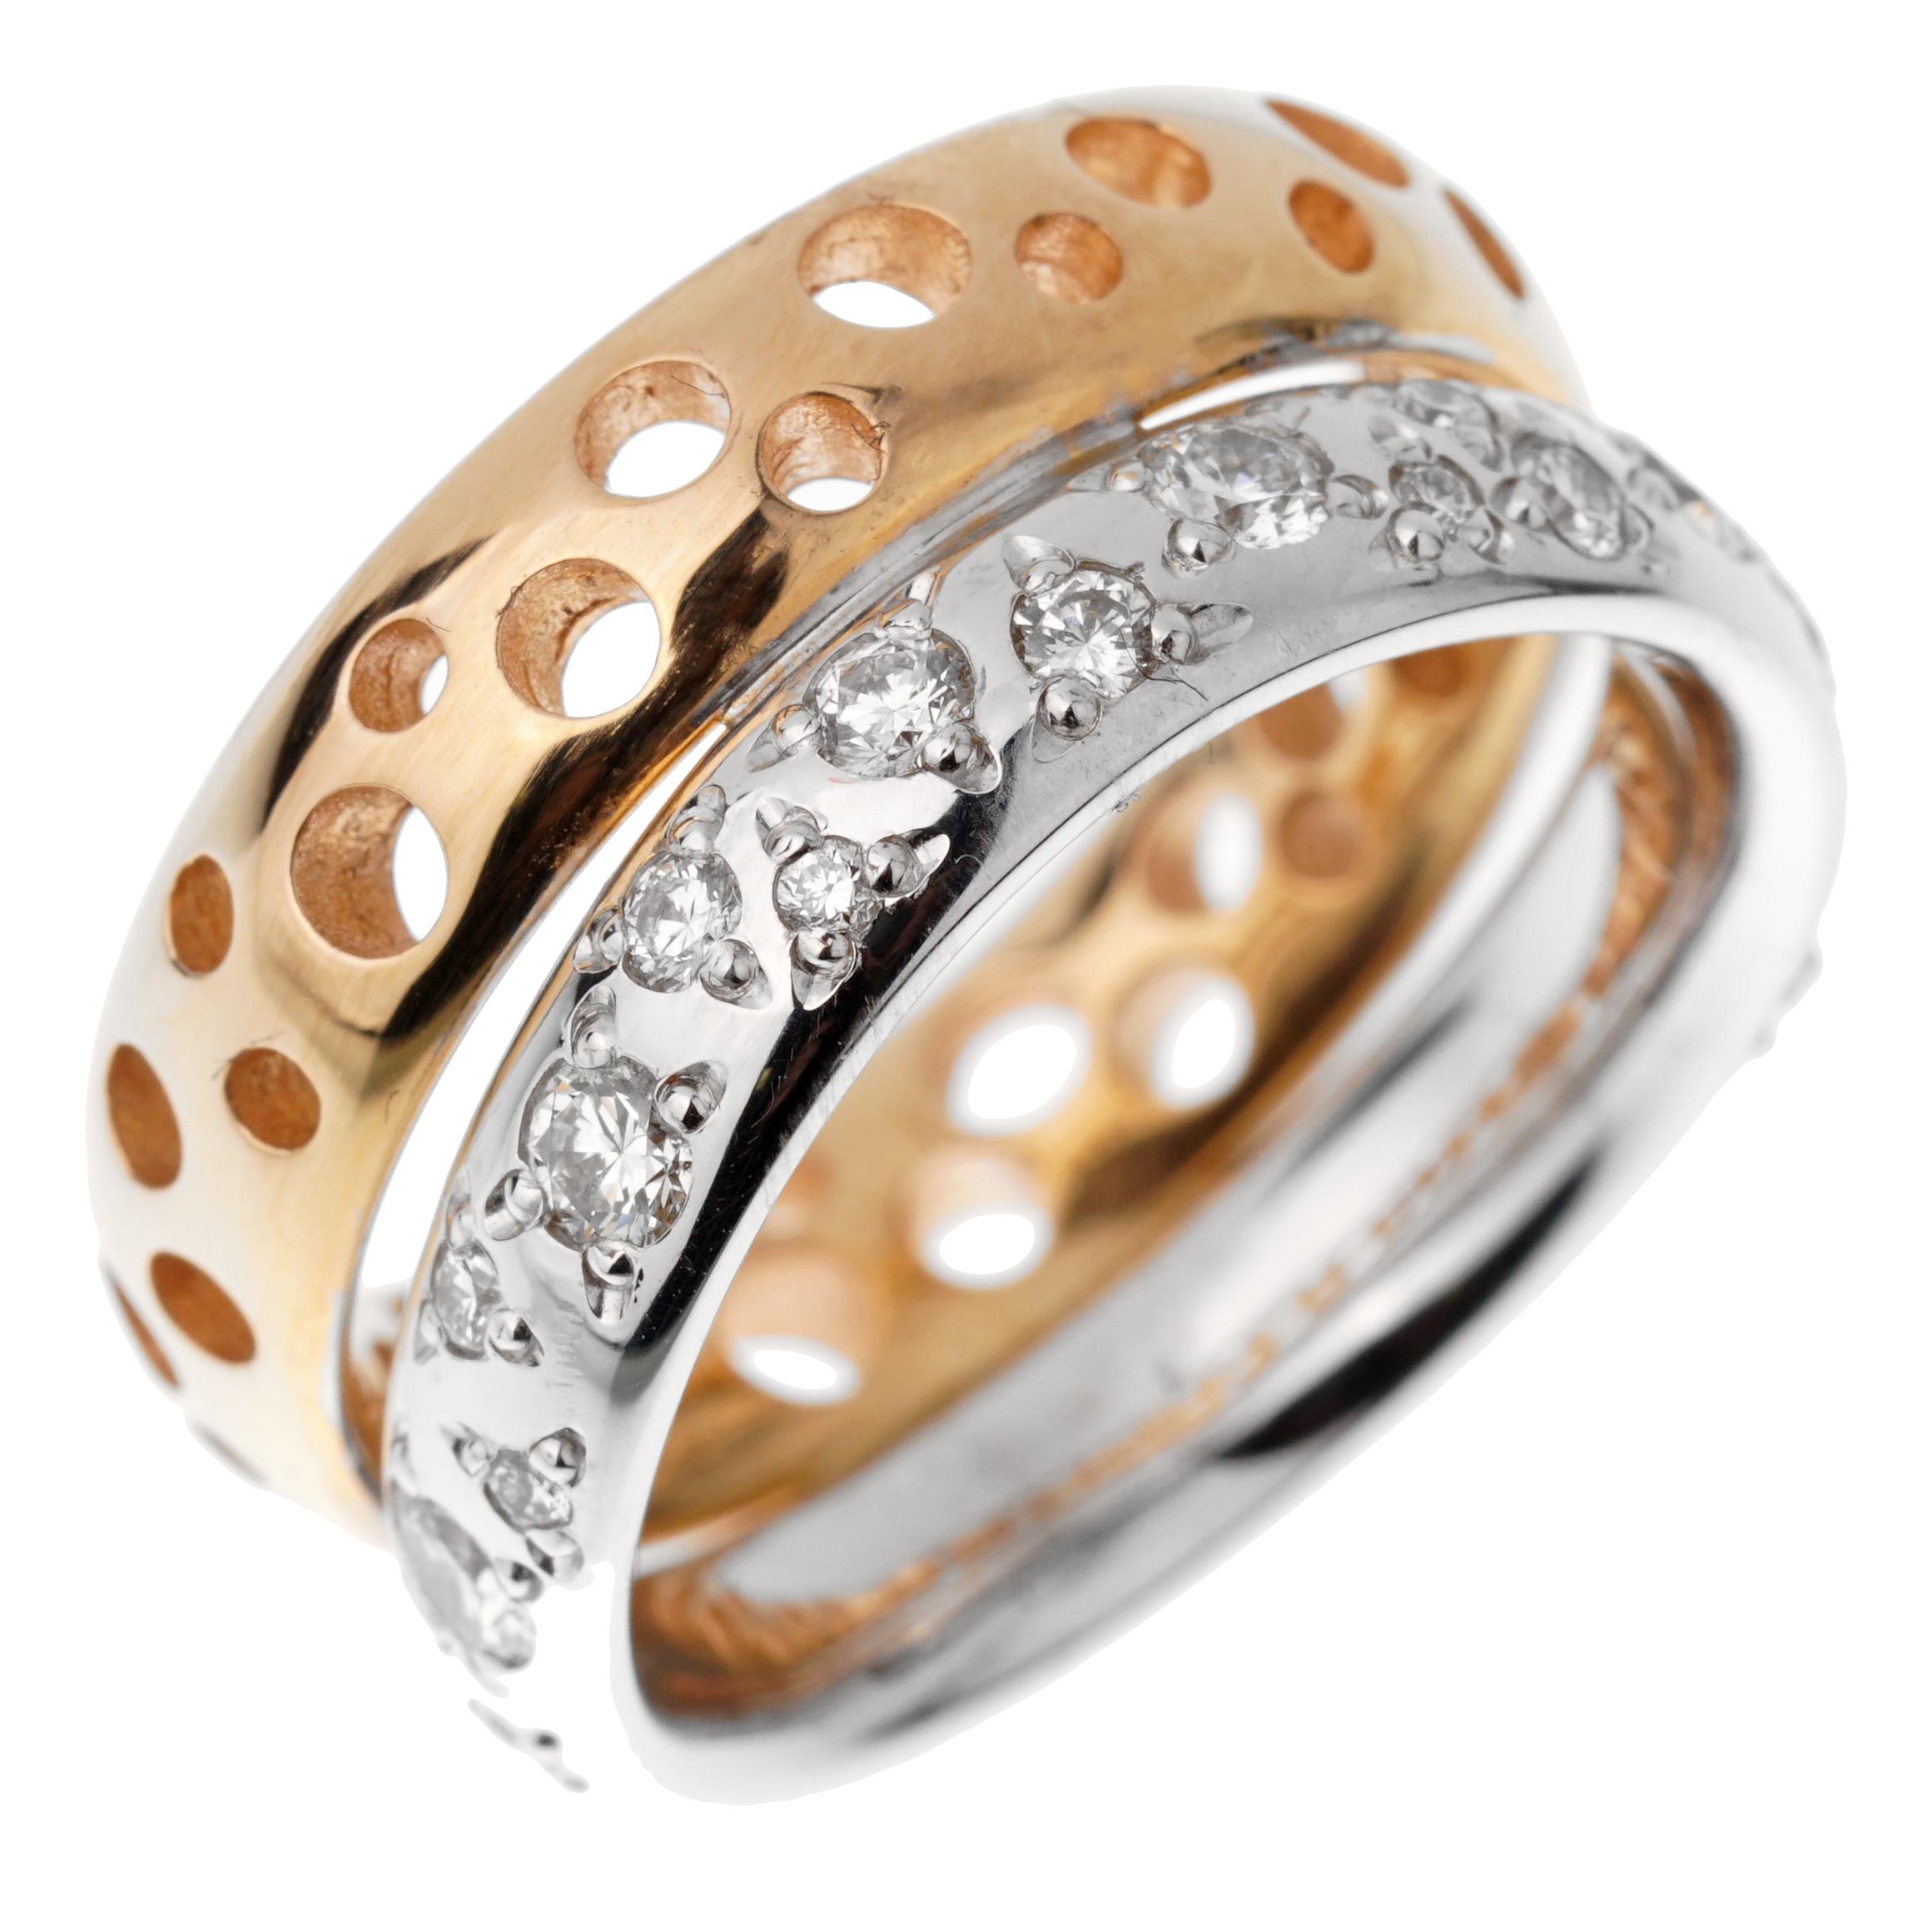 A chic Pomellato stacked ring showcasing a white gold wave band adorned with round brilliant cut diamonds attached to a rose gold bubble motif band. The ring measures .35